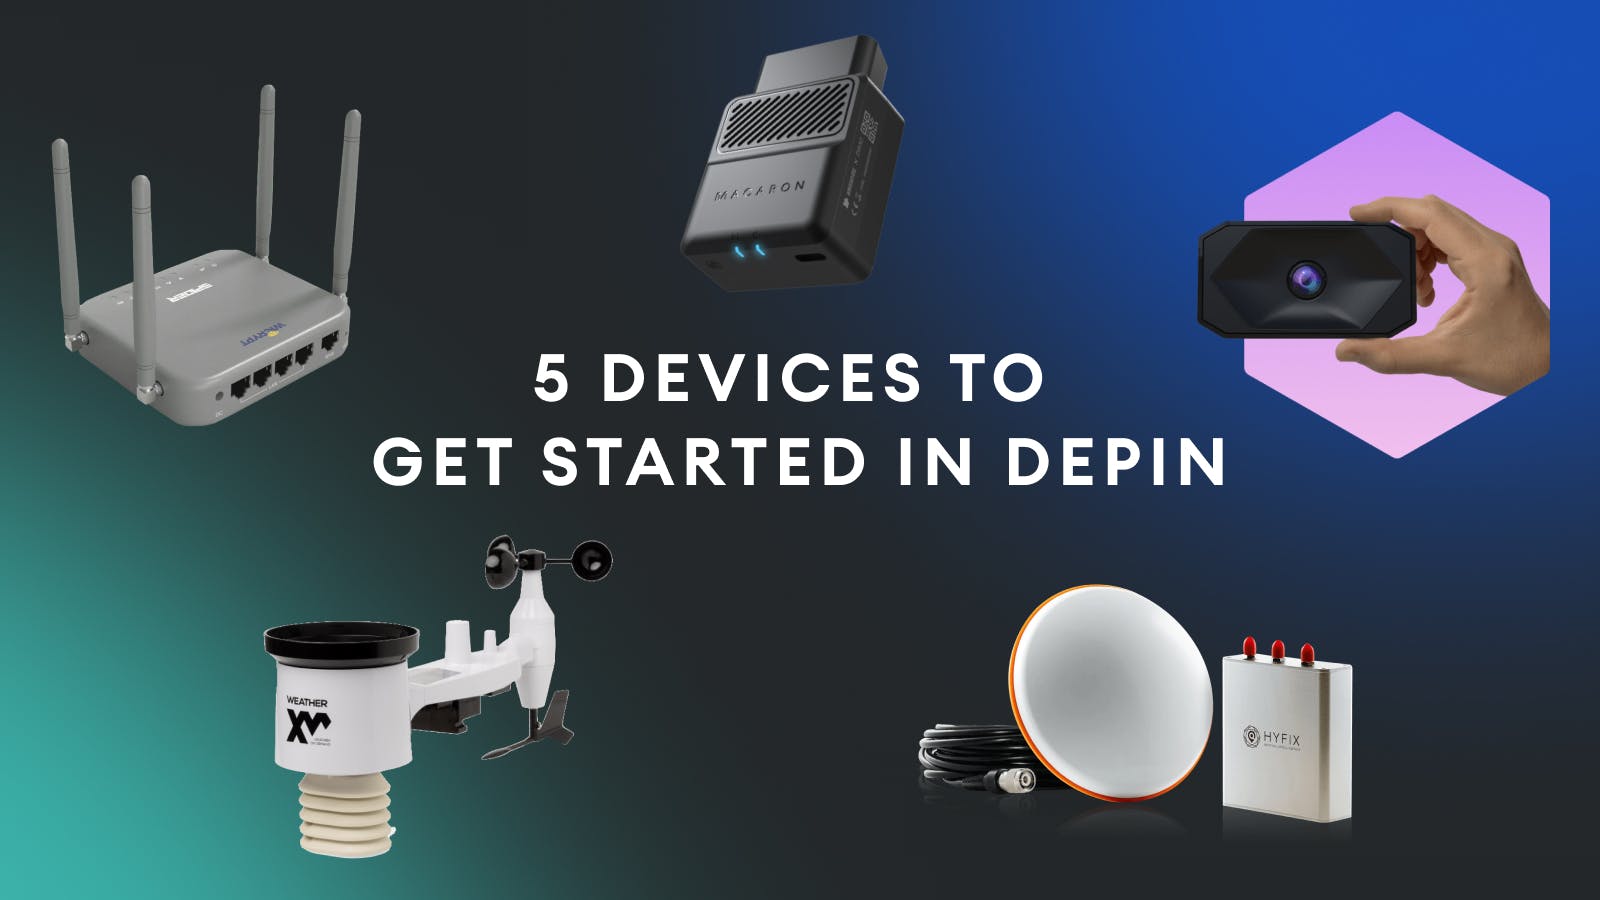 DePIN: A New Way for Hobby Miners to Earn in Crypto cover